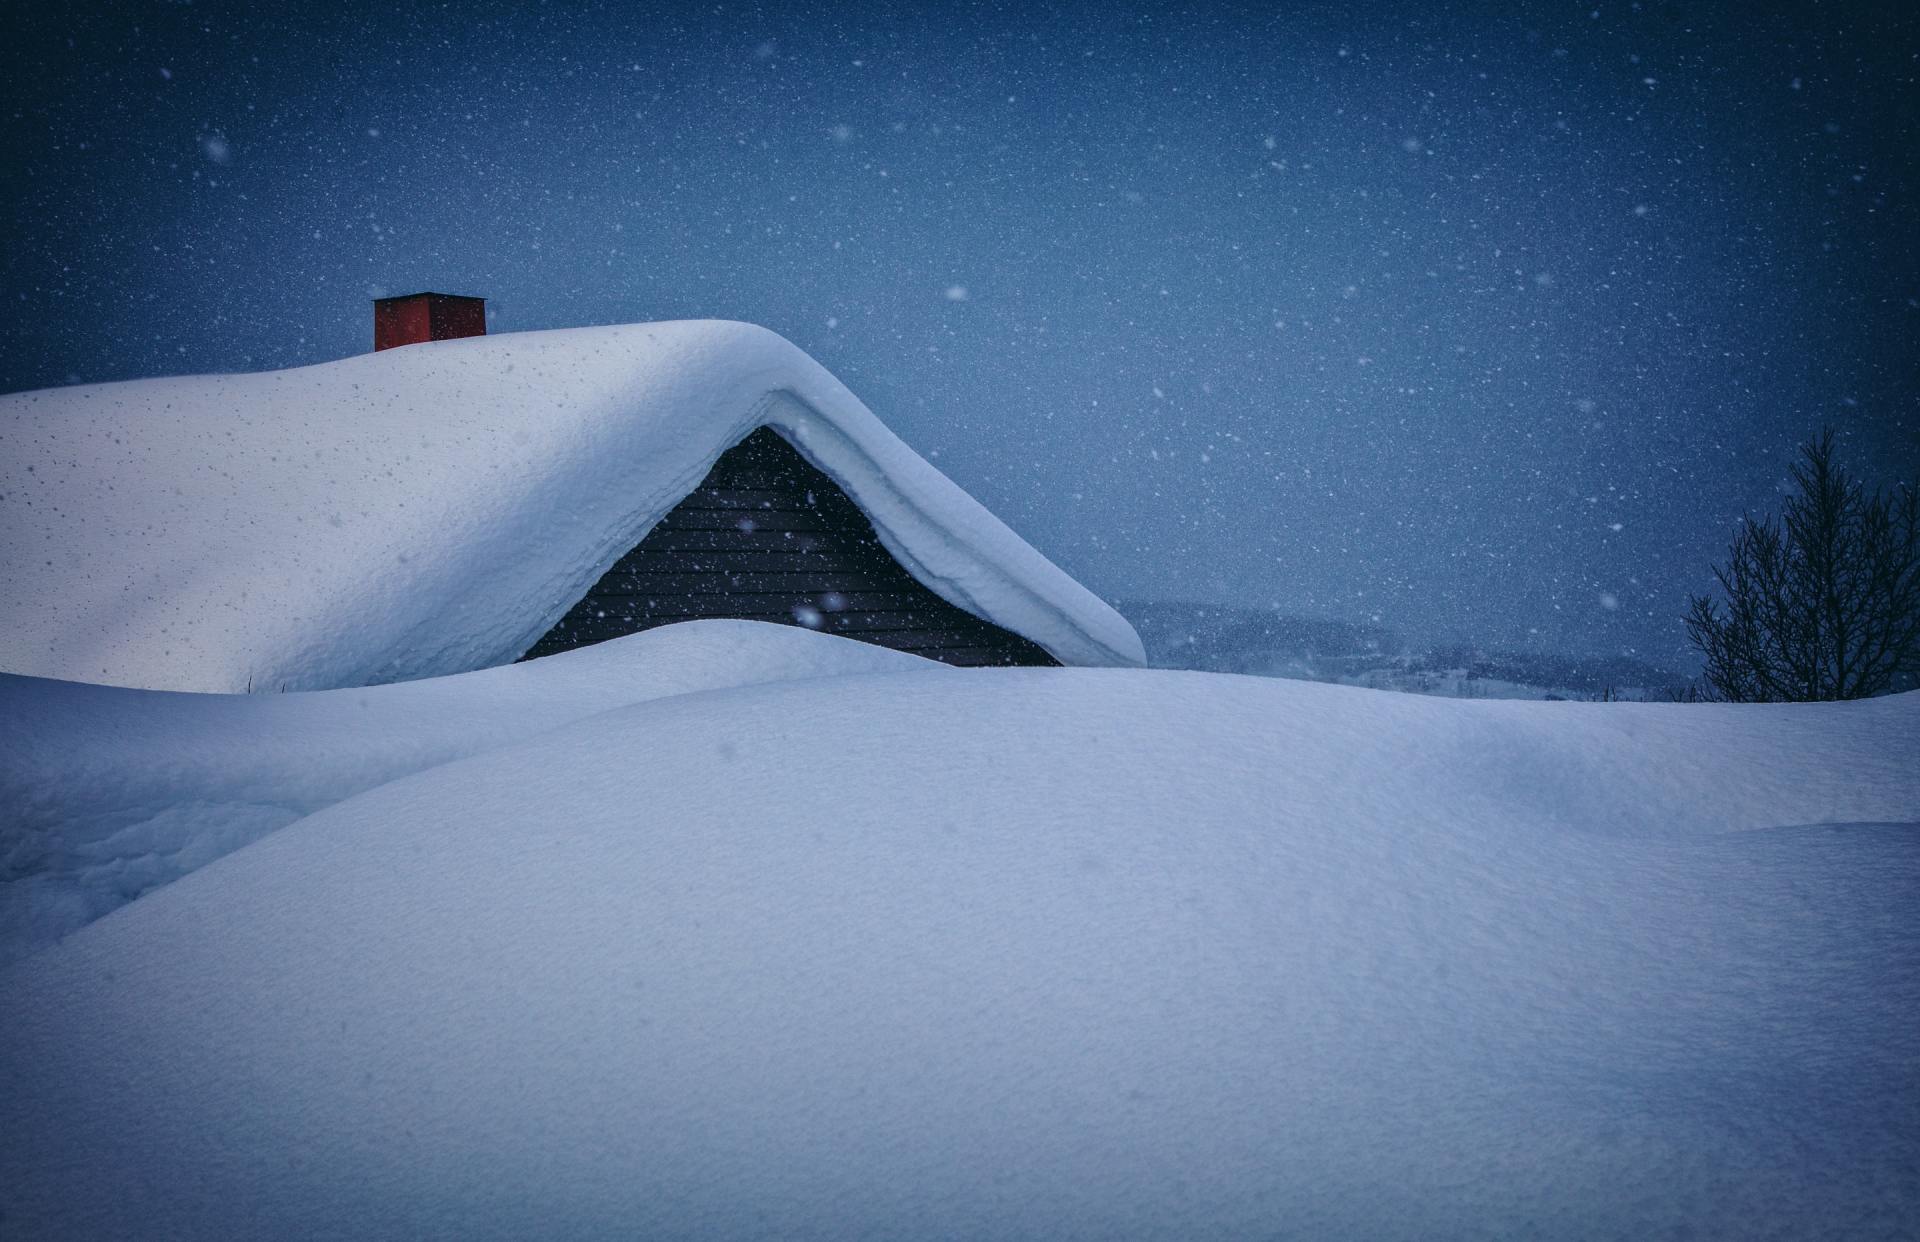 Photograph of a home with snow on the roof